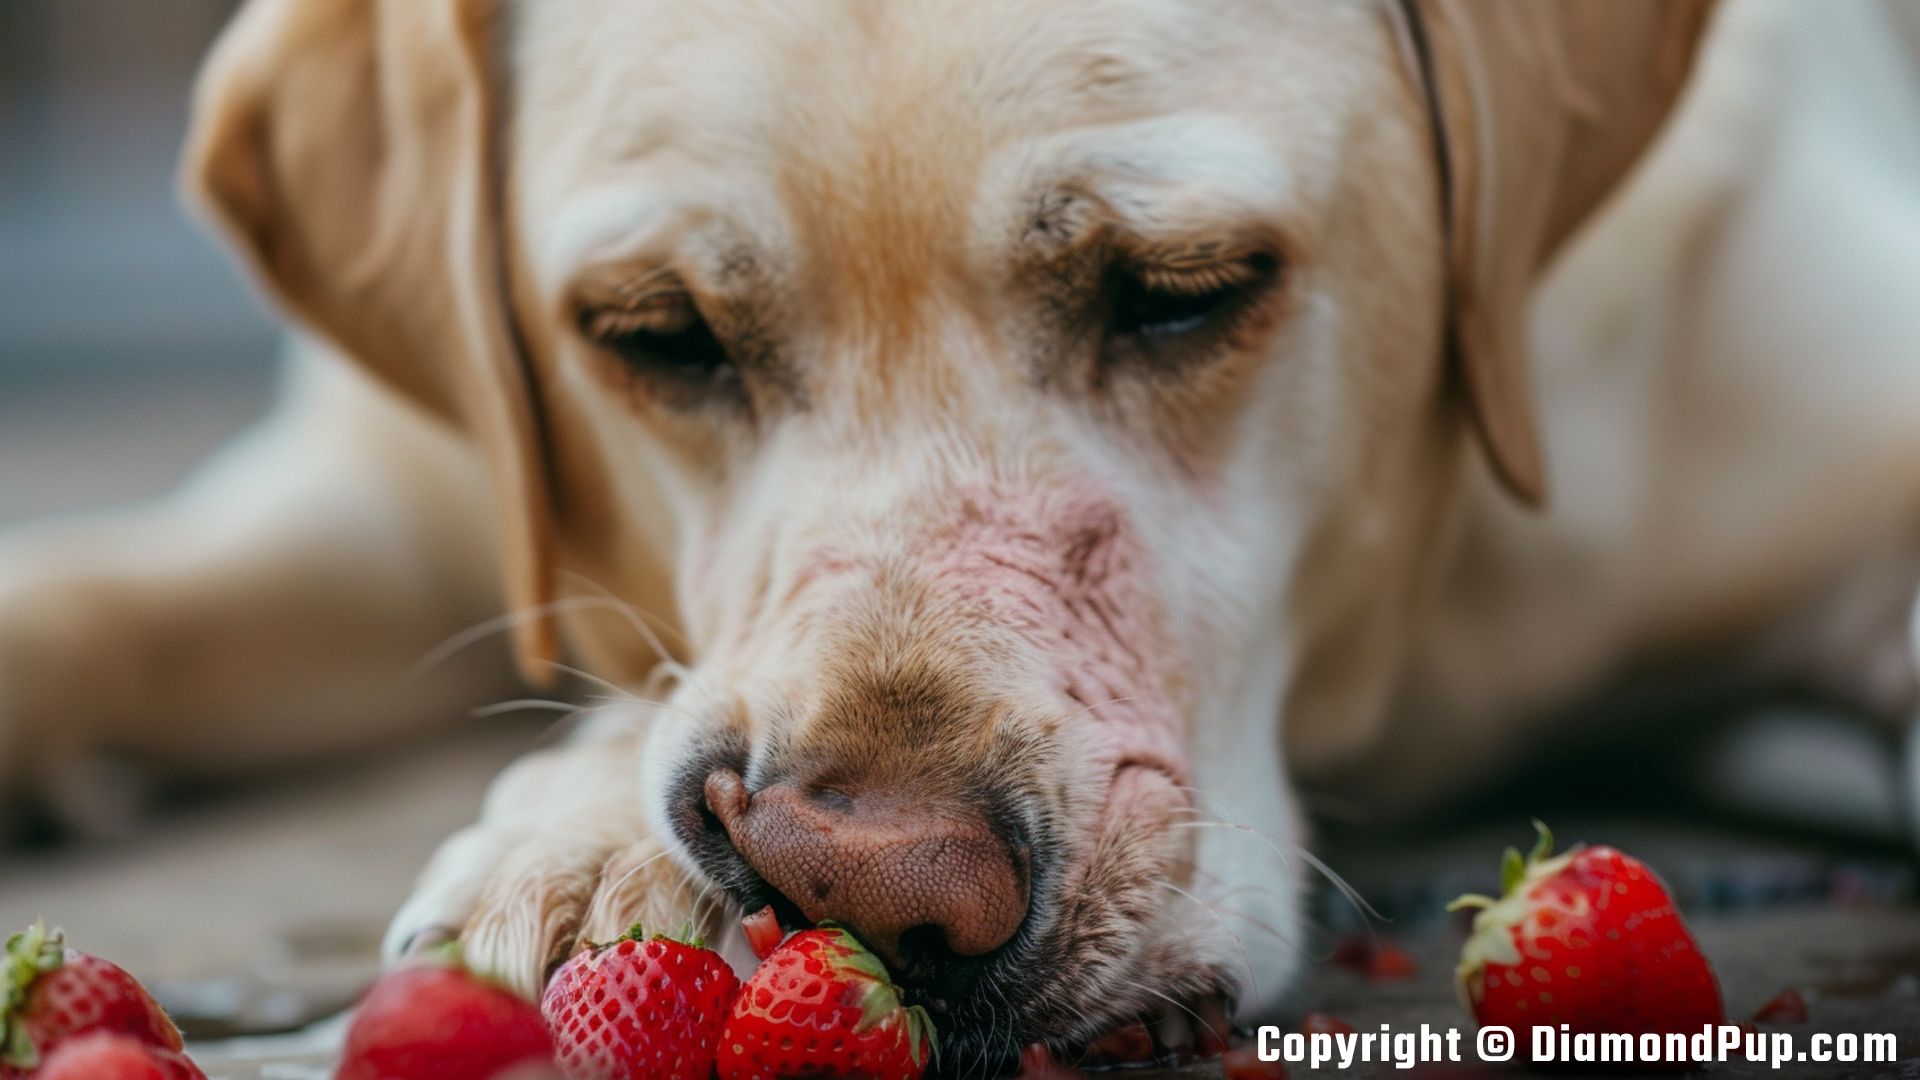 Photo of a Playful Labrador Snacking on Strawberries